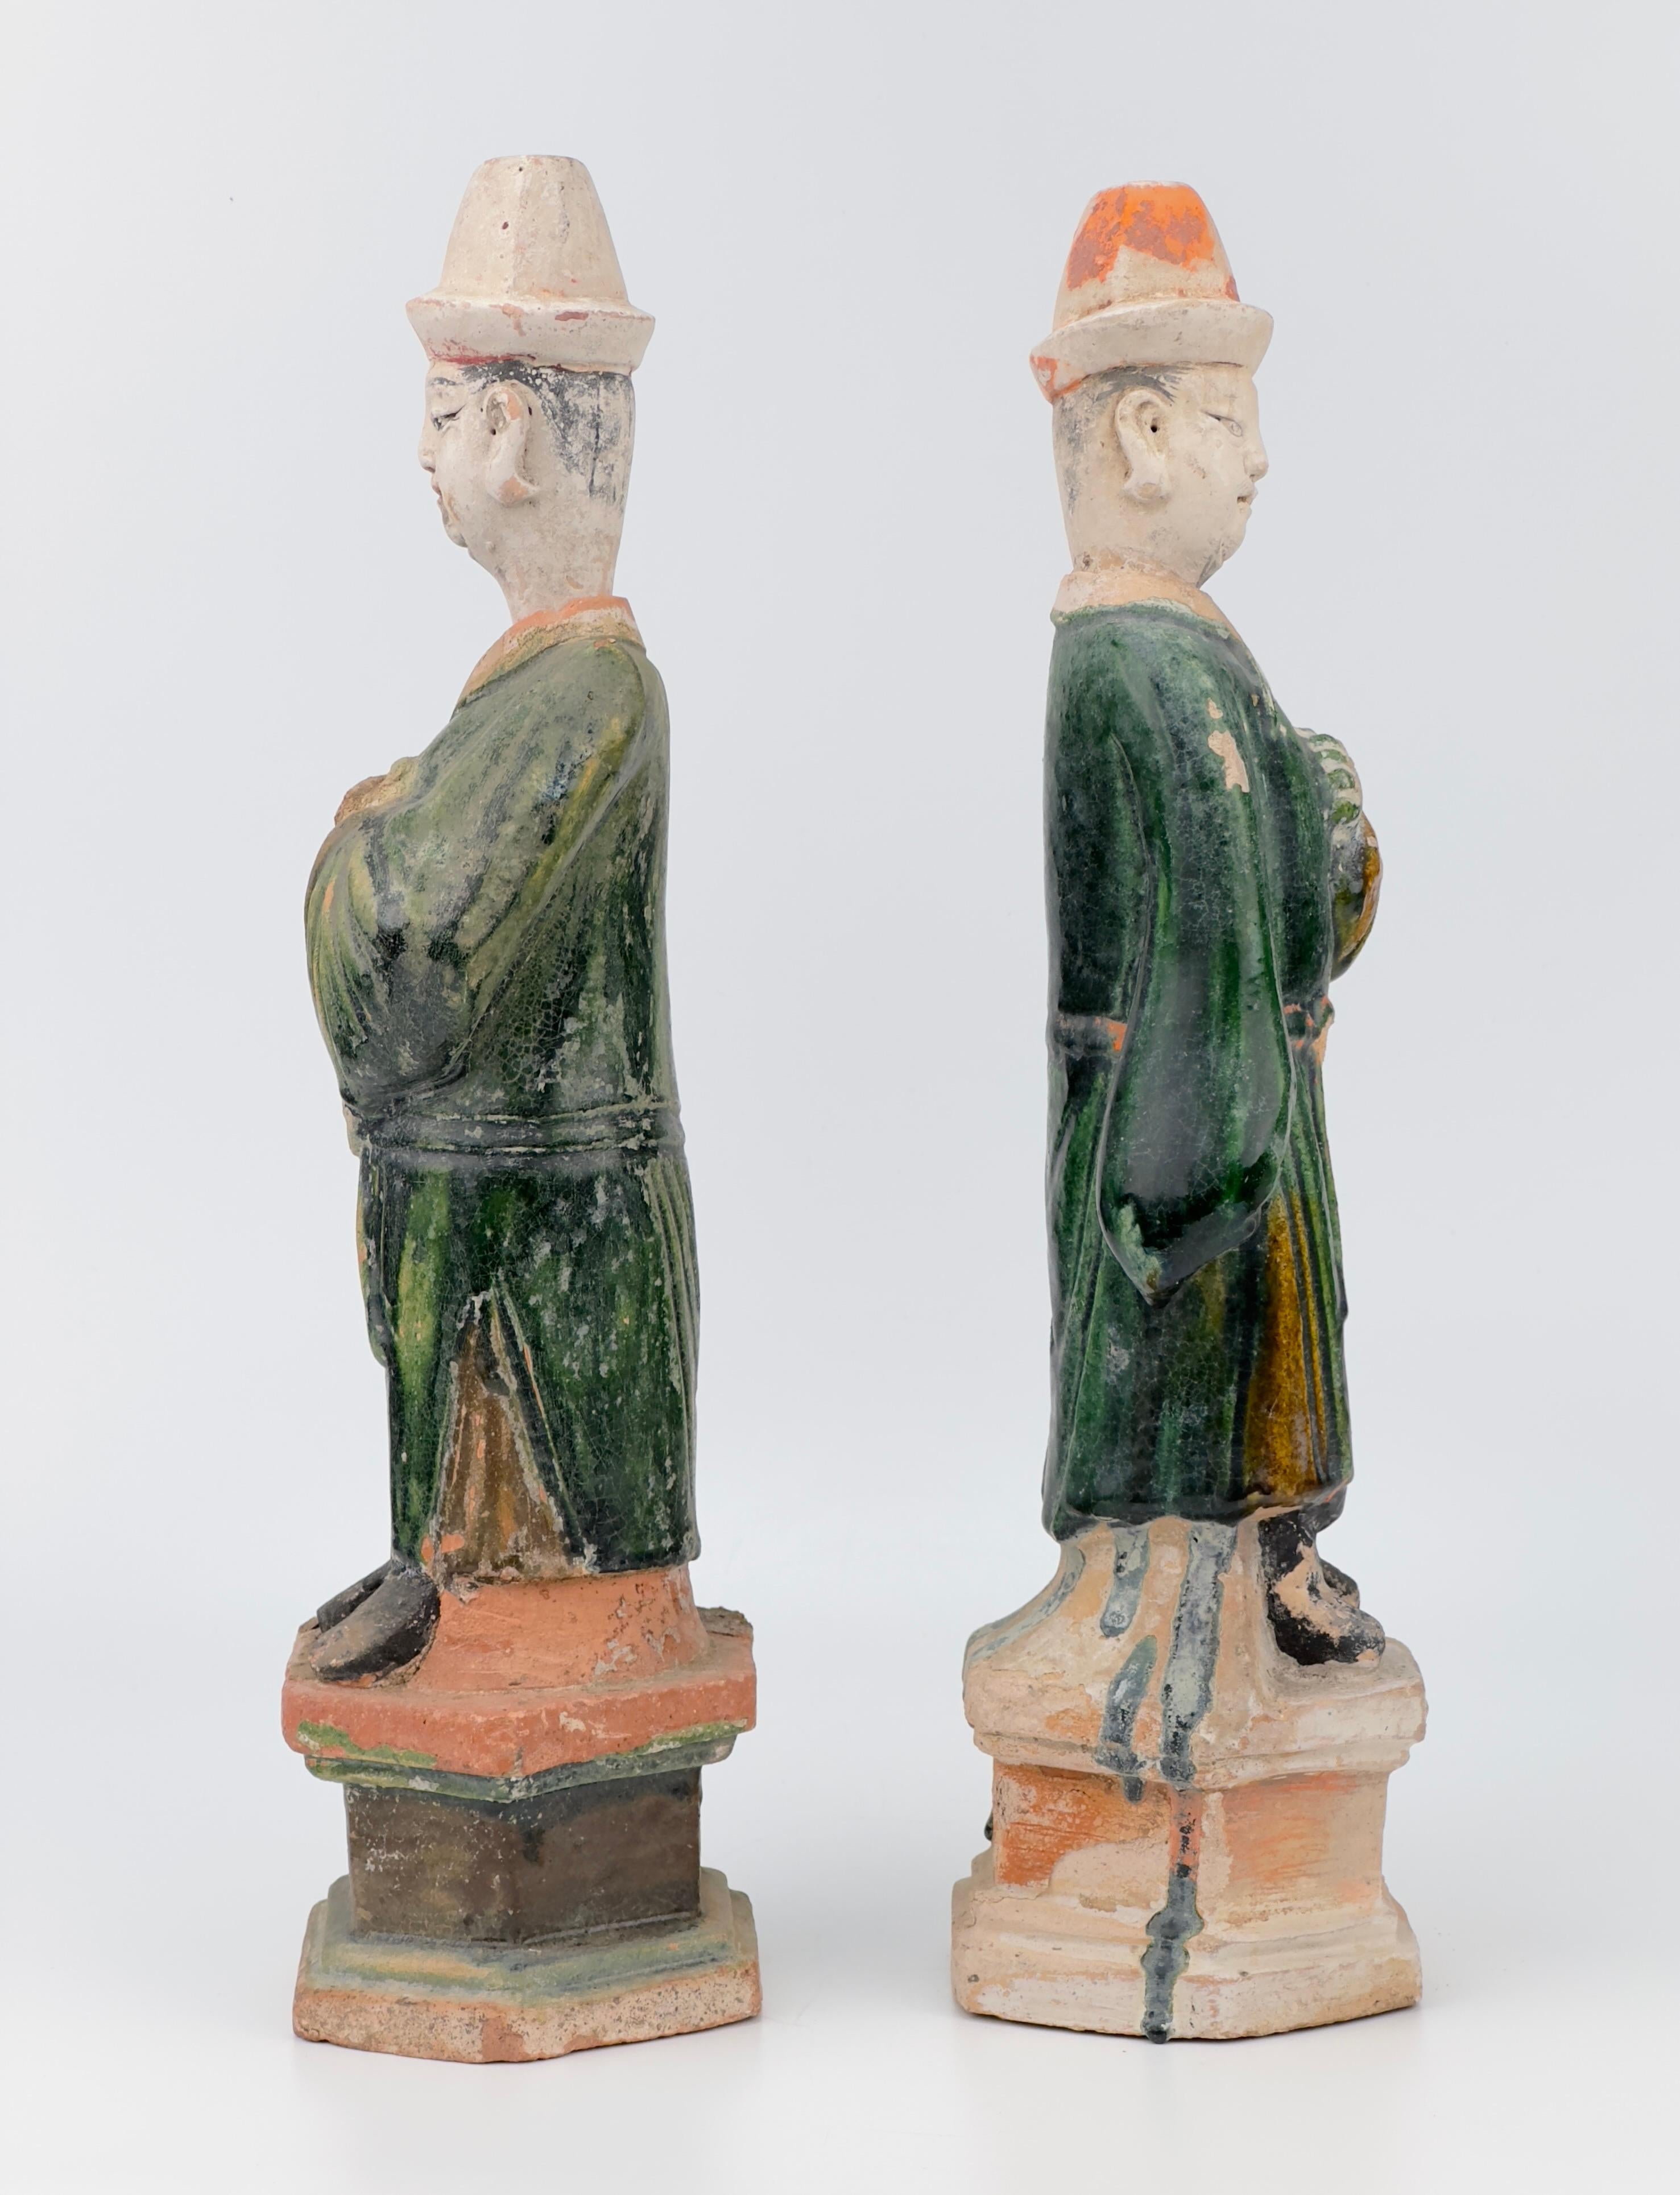 Statues of Chinese dignitaries crafted from terracotta, featuring glazes in green and ocher, are set on rectangular bases. The wide-sleeved robes and craftsmanship, along with the cylindrical flat hats with detachable head, indicate their Chinese